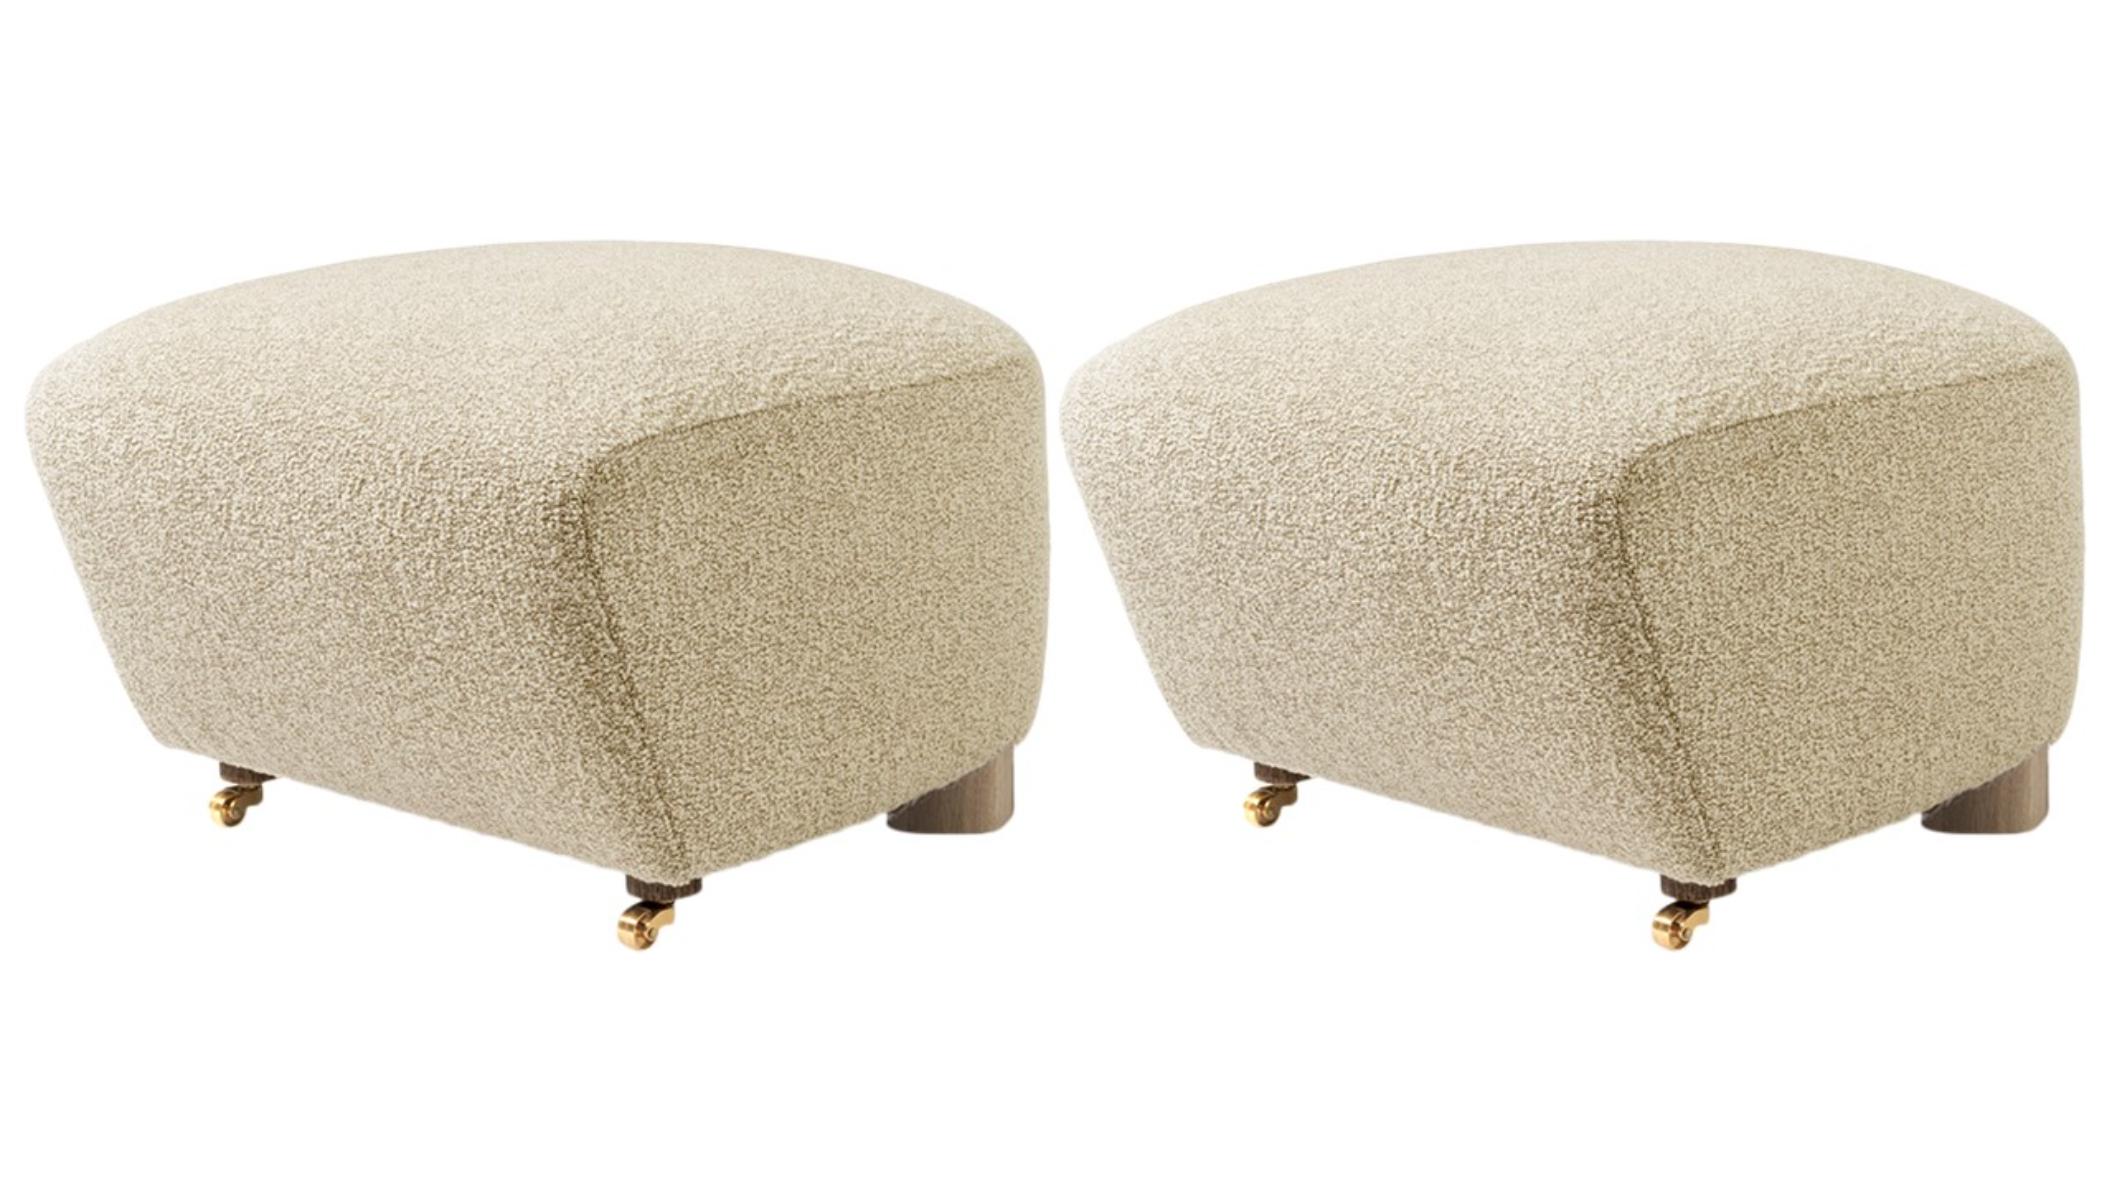 Set of 2 beige natural oak sahco zero the tired man footstool by Lassen
Dimensions: W 55 x D 53 x H 36 cm 
Materials: Textile

Flemming Lassen designed the overstuffed easy chair, The Tired Man, for The Copenhagen Cabinetmakers’ Guild